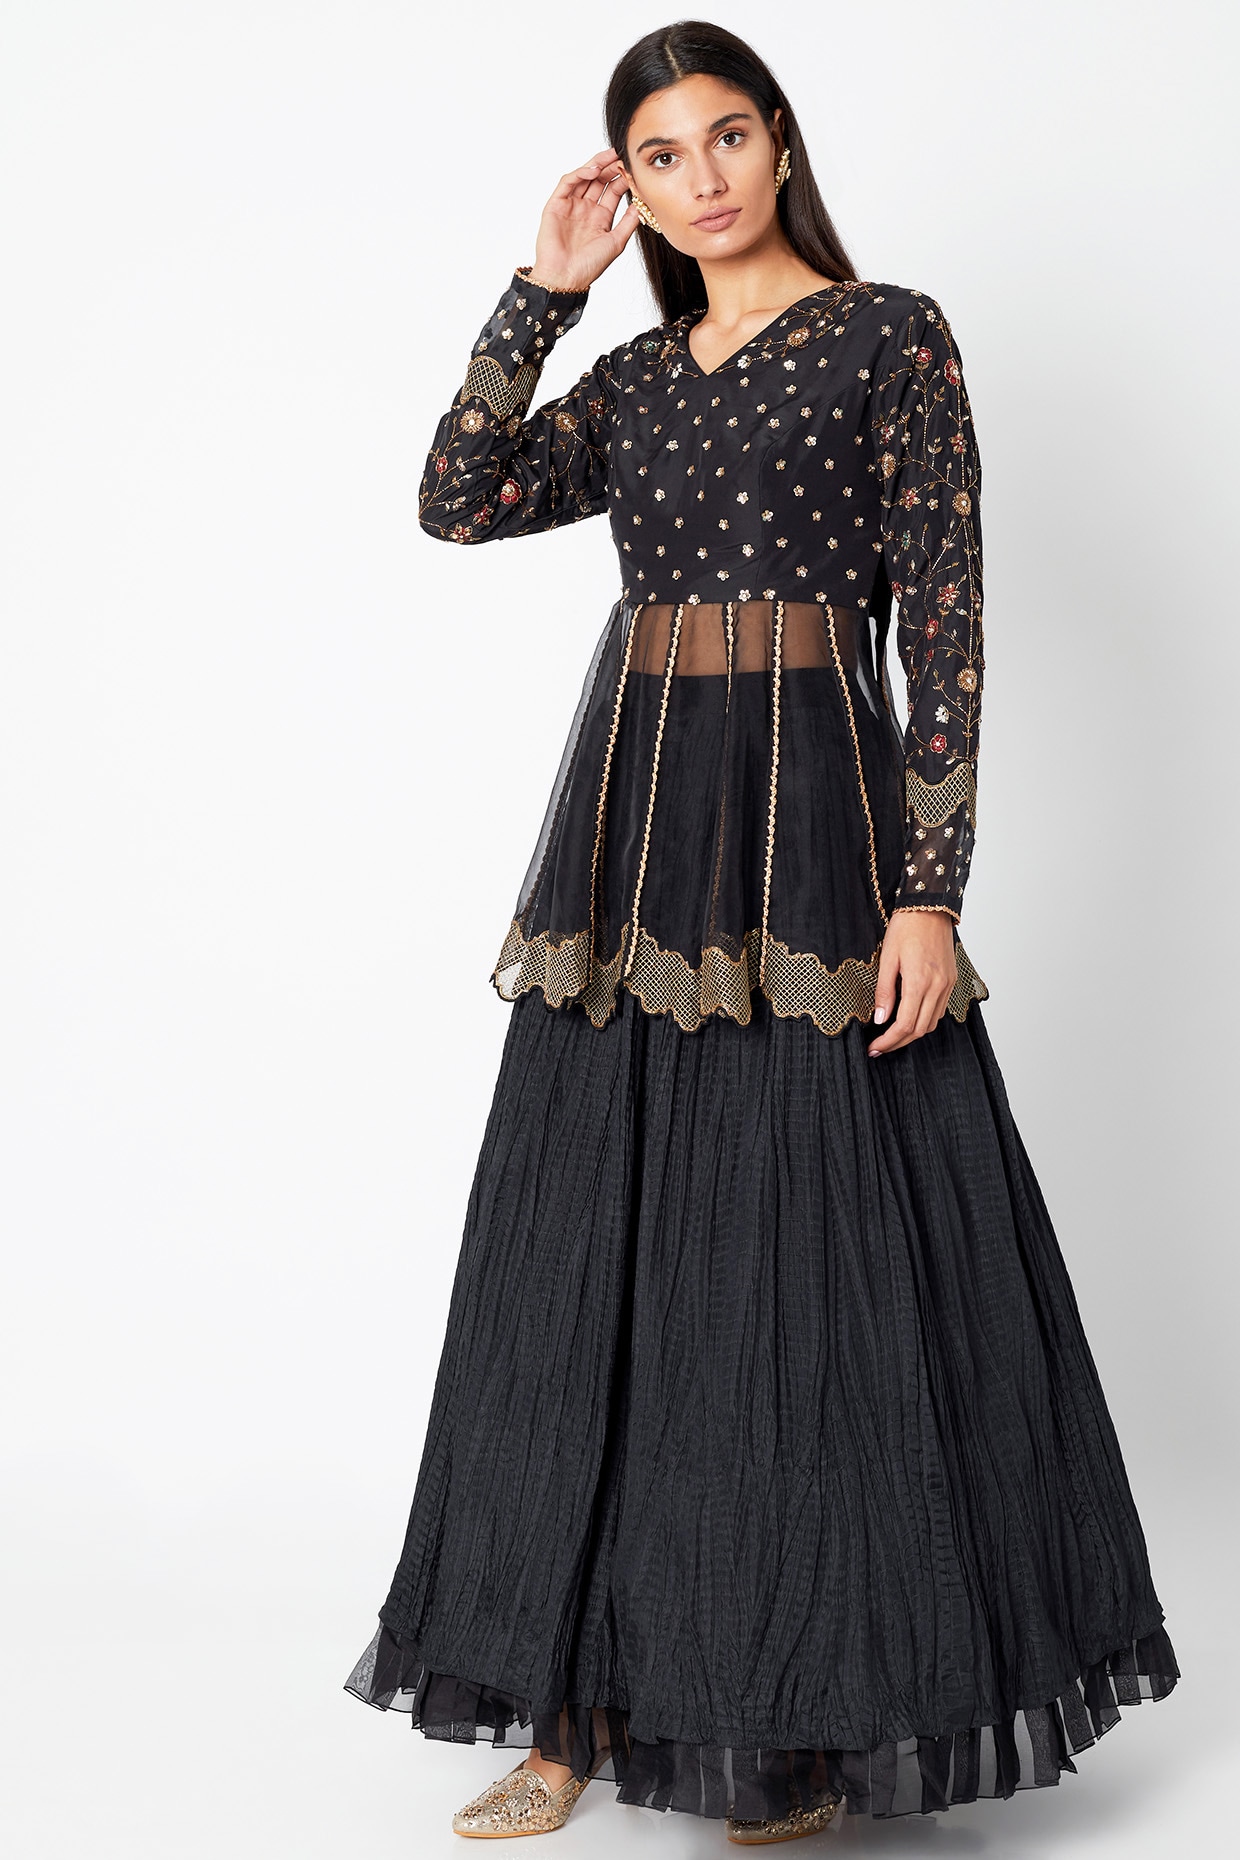 Heavy Embroidered Party Wear Look Bridal Wear Peplum Top Lehenga With  Dupatta